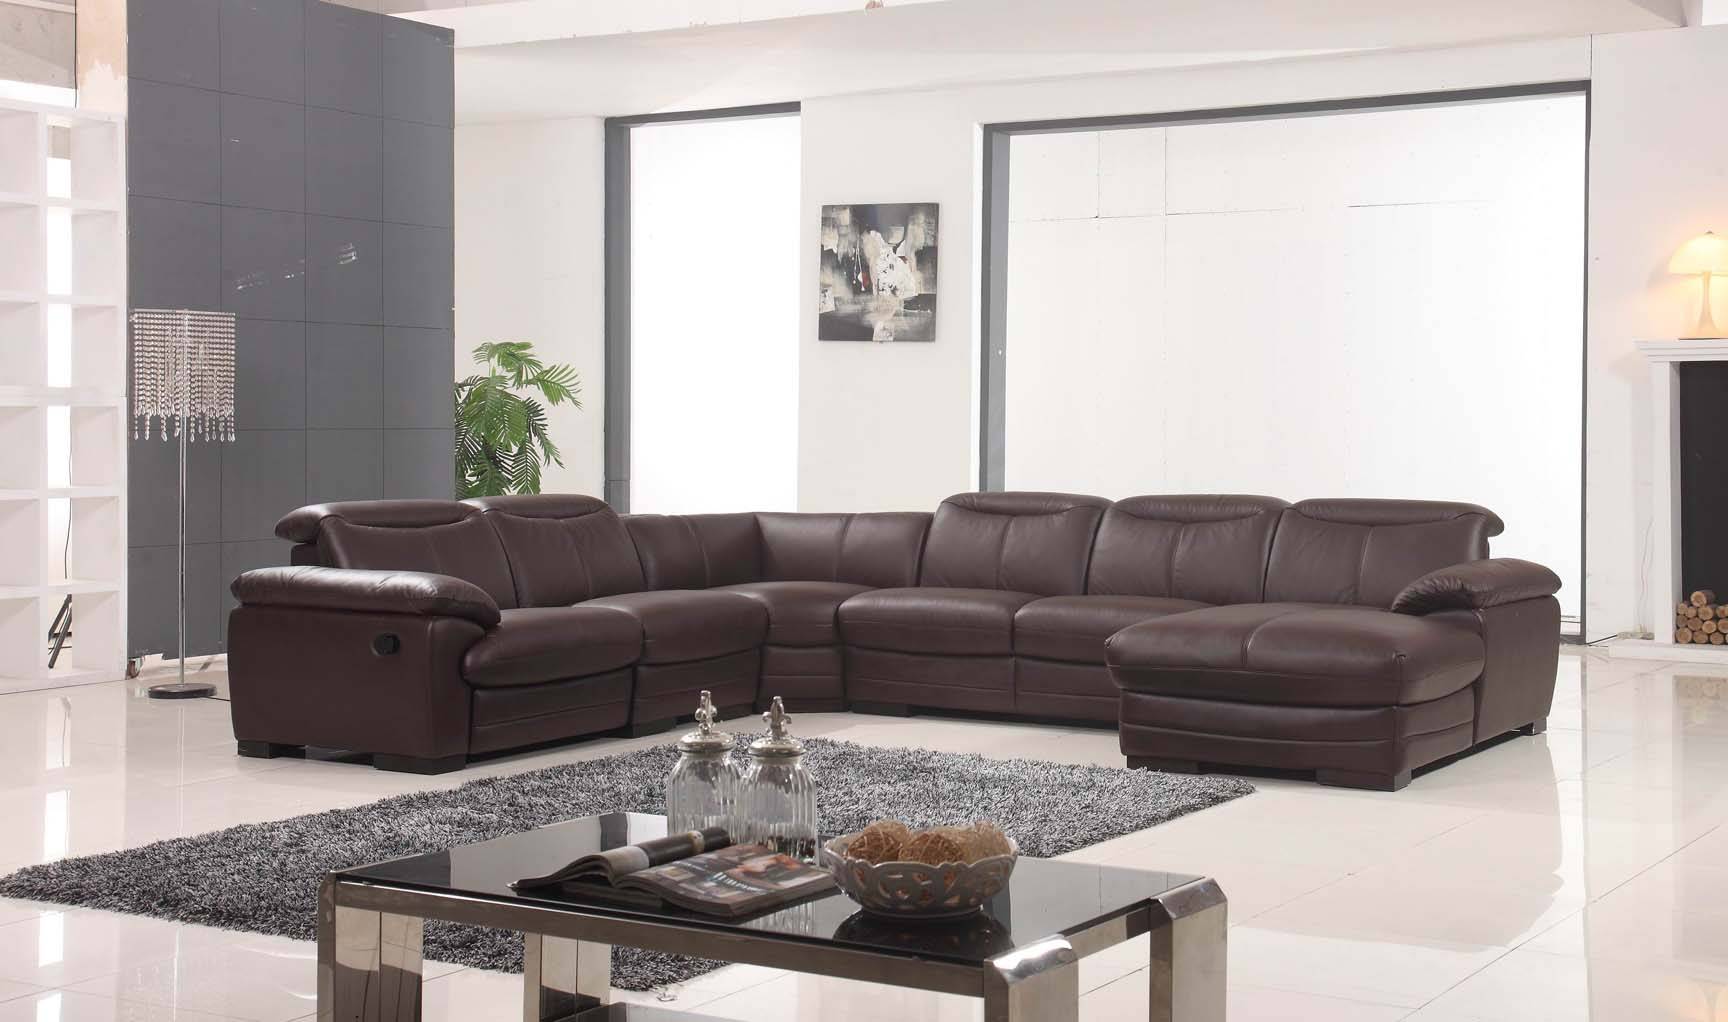 Large Brown Leather Contemporary Sectional Set with Recliner Chair ...